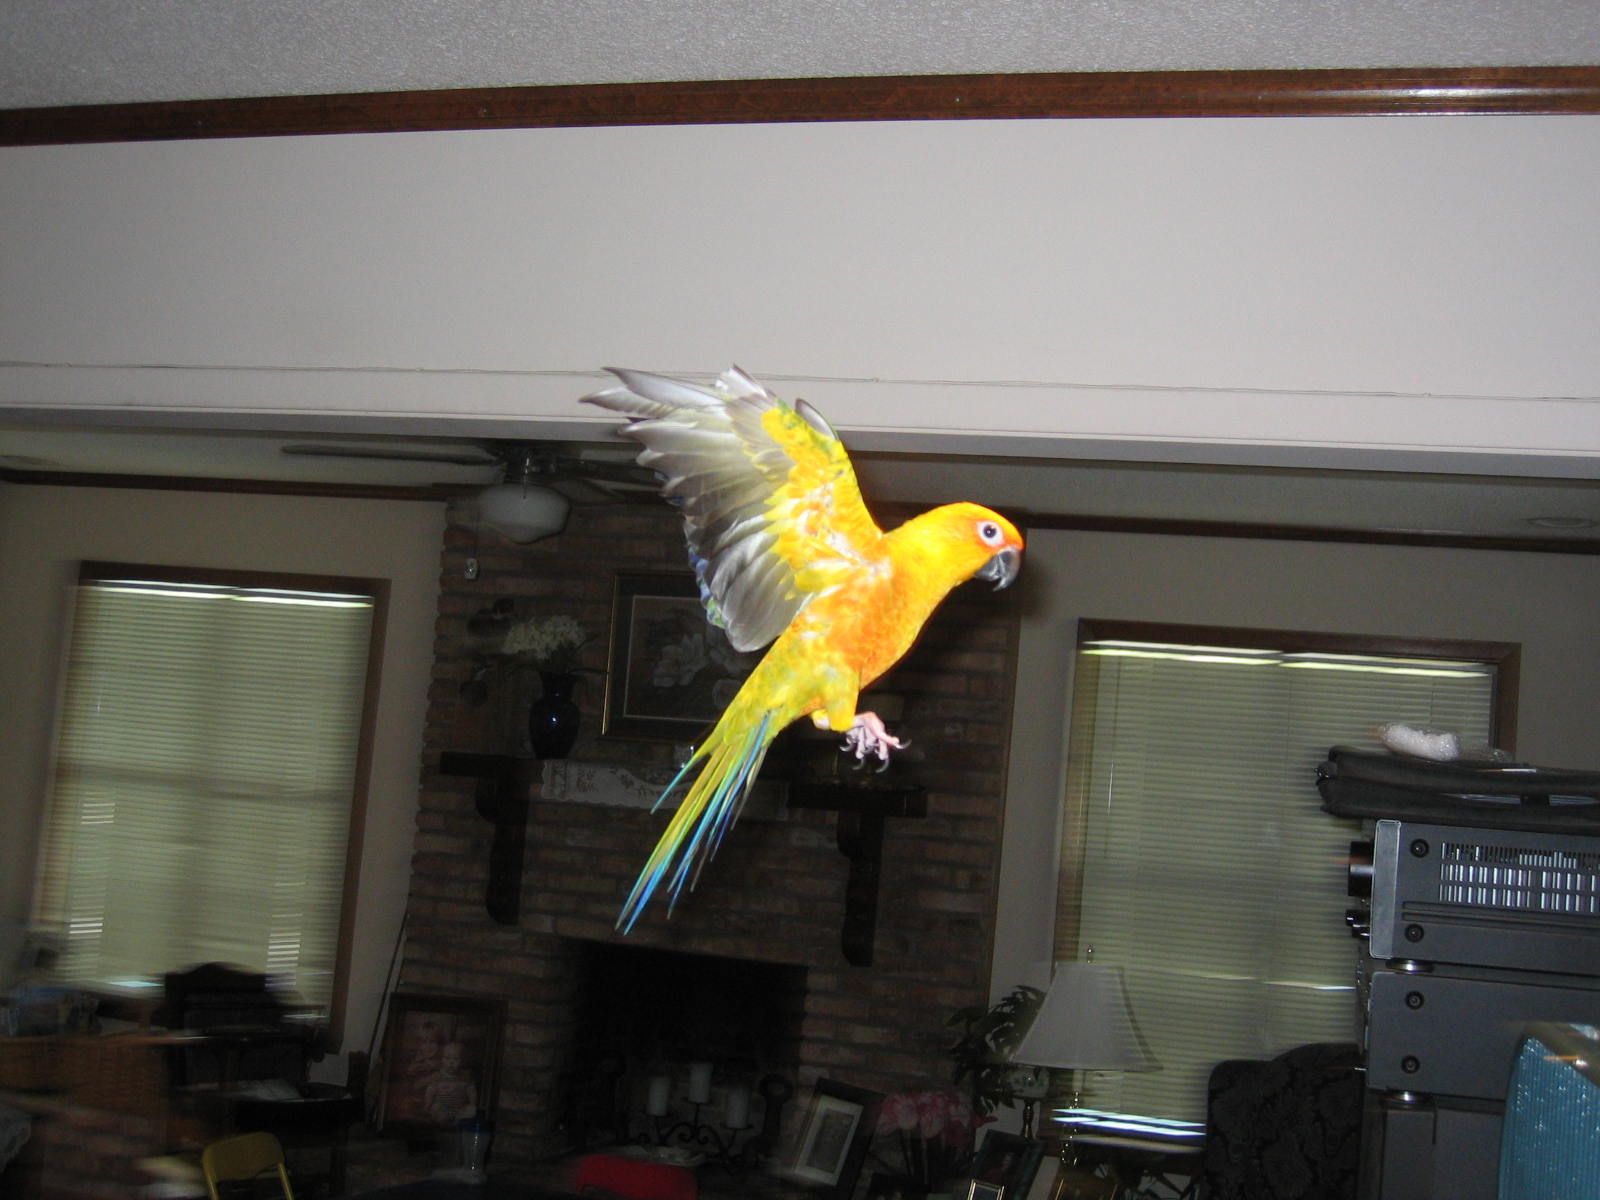 sunnie flying to his cage